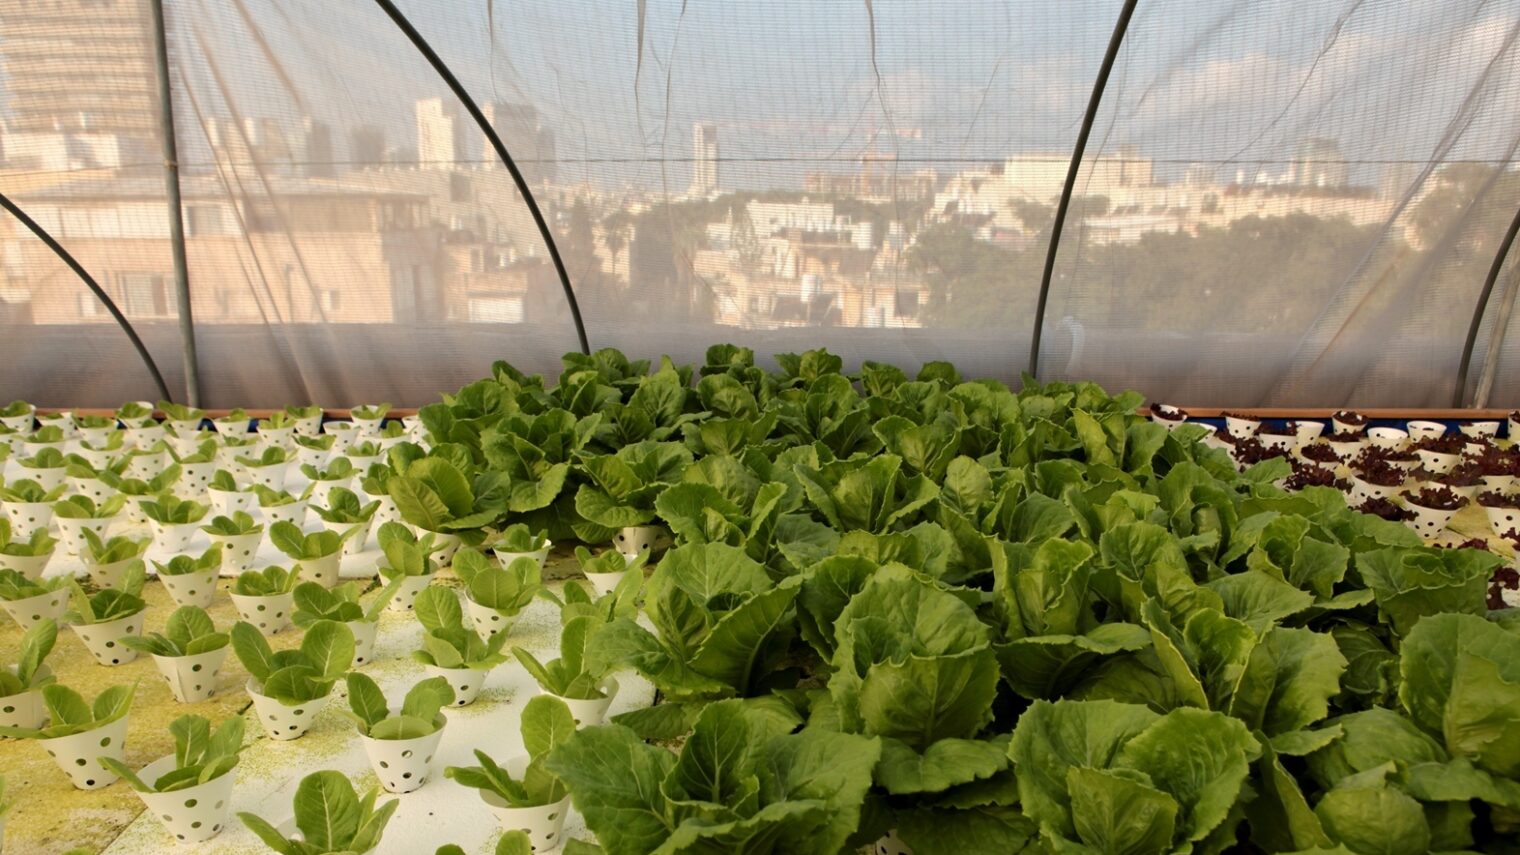 Fresh greens grown in the middle of Tel Aviv. Photo by Mendi Falk